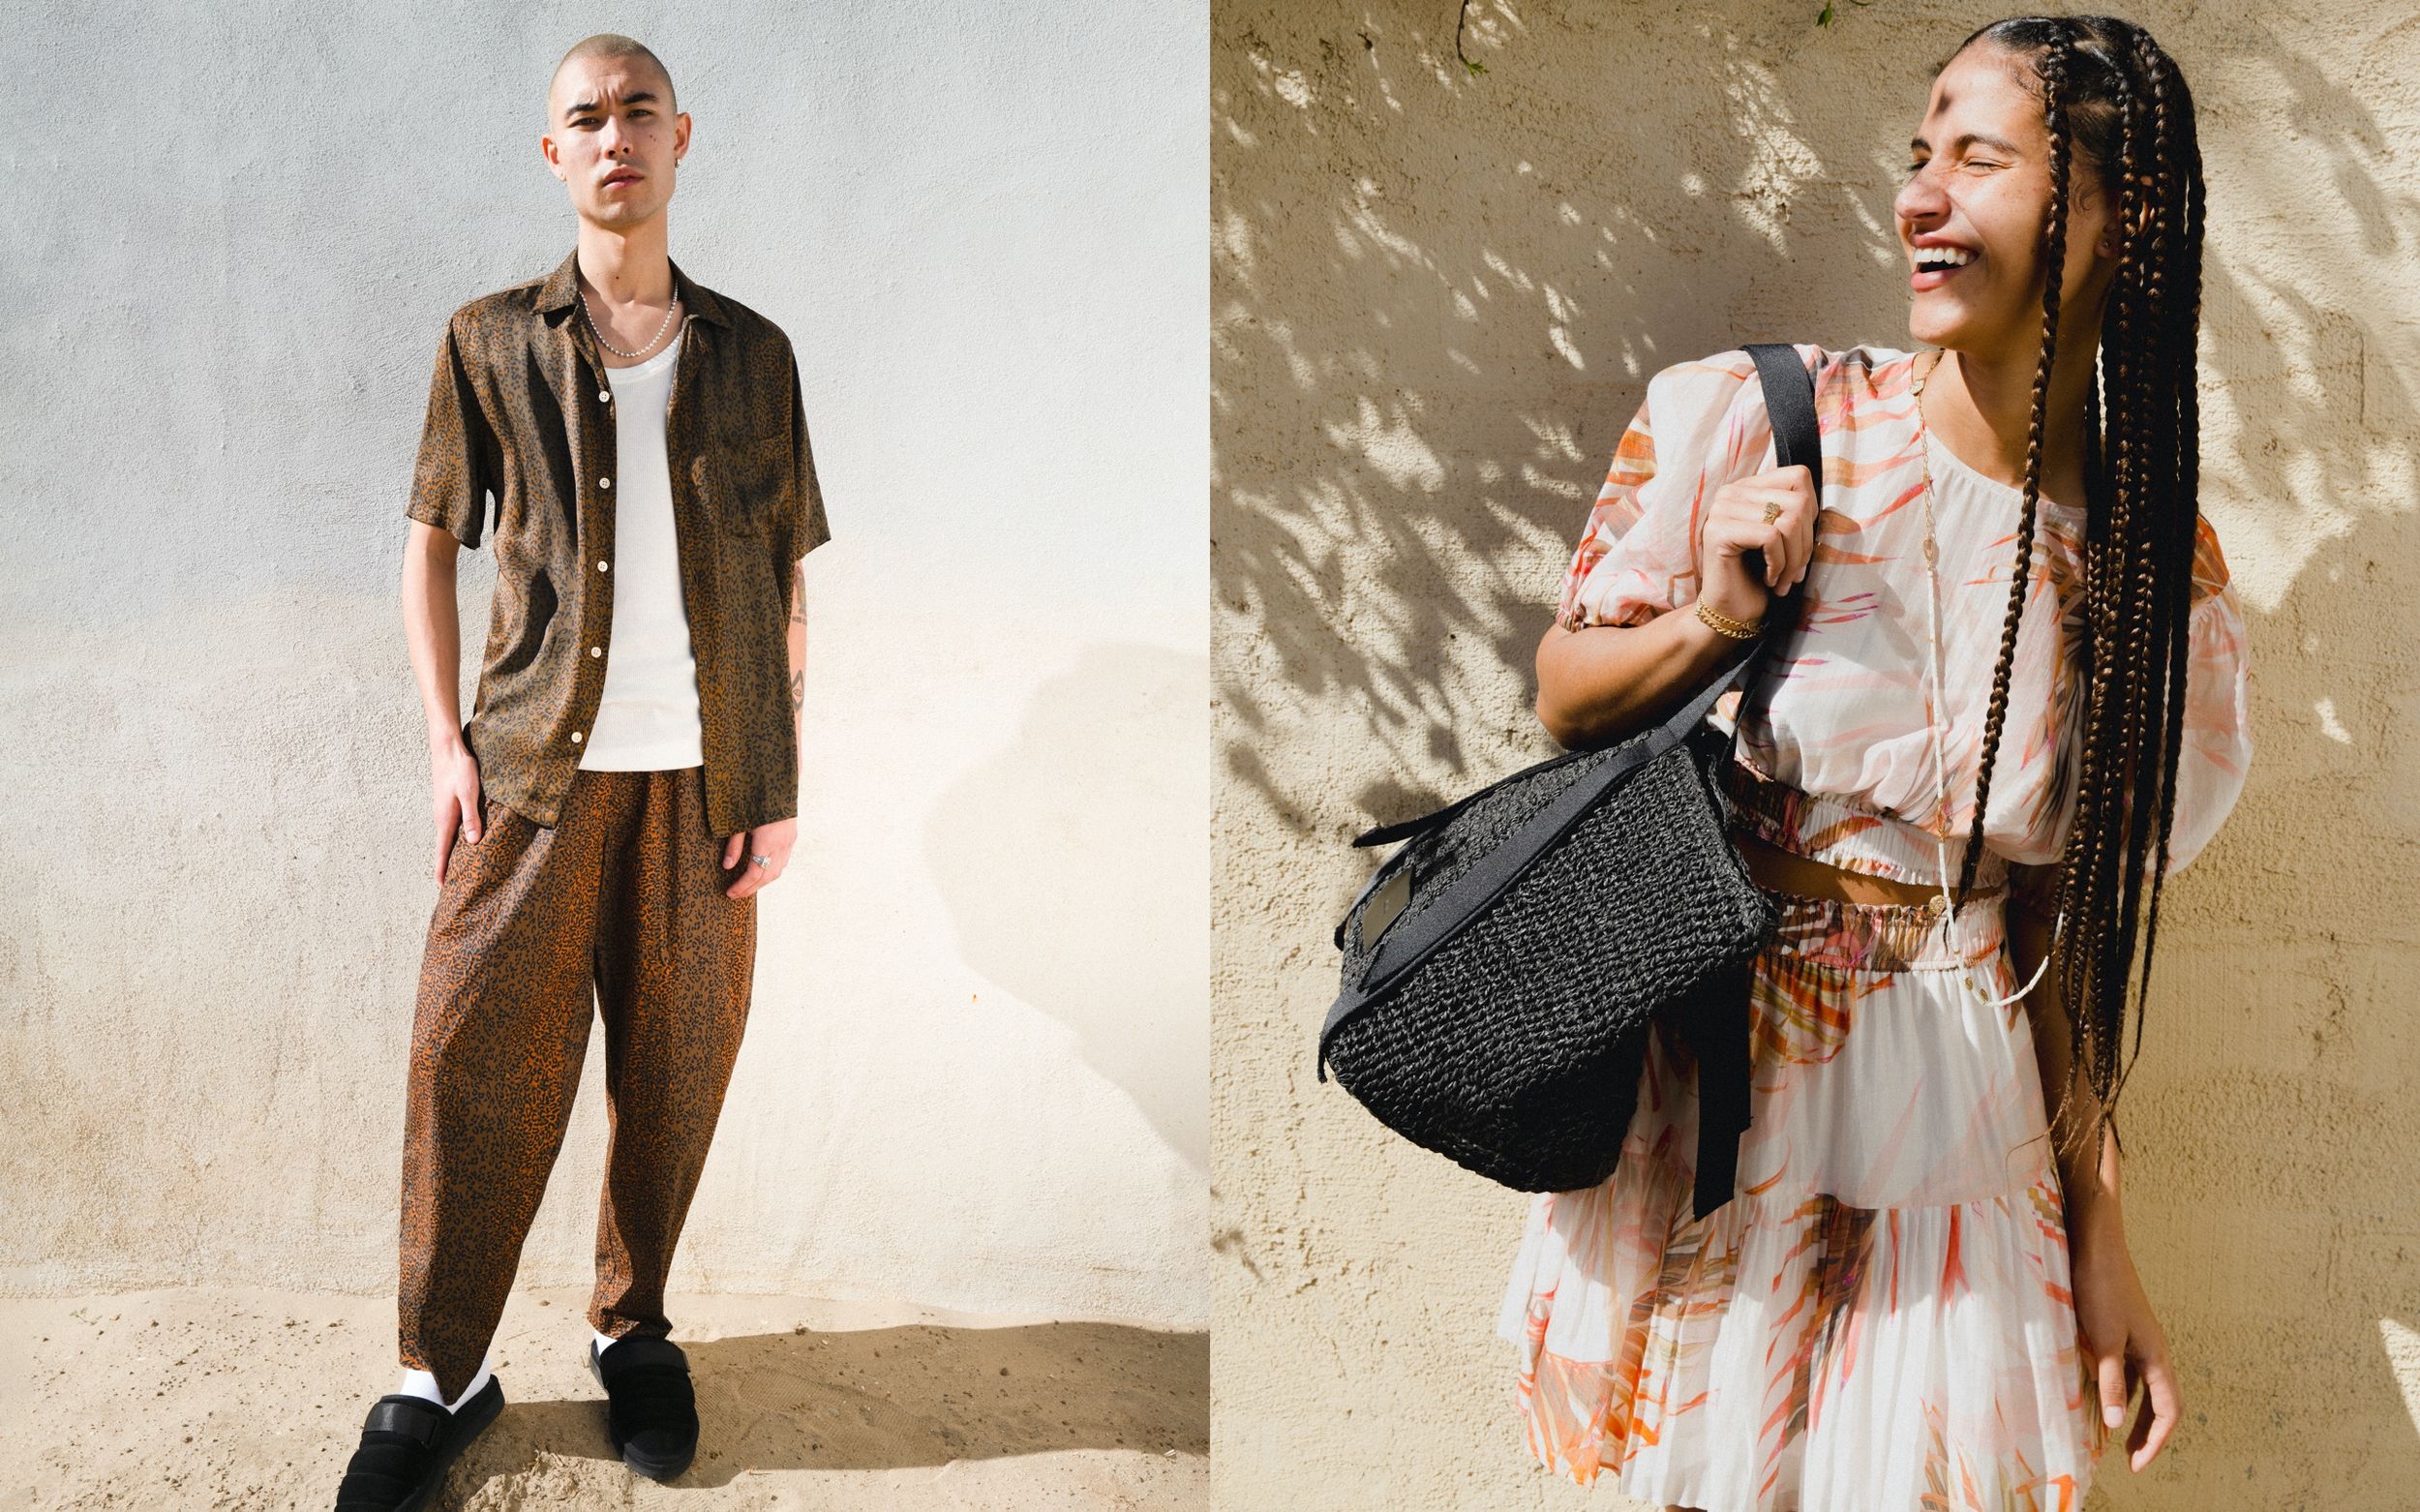 Two portraits of a man and a woman wearing items from our latest collection.